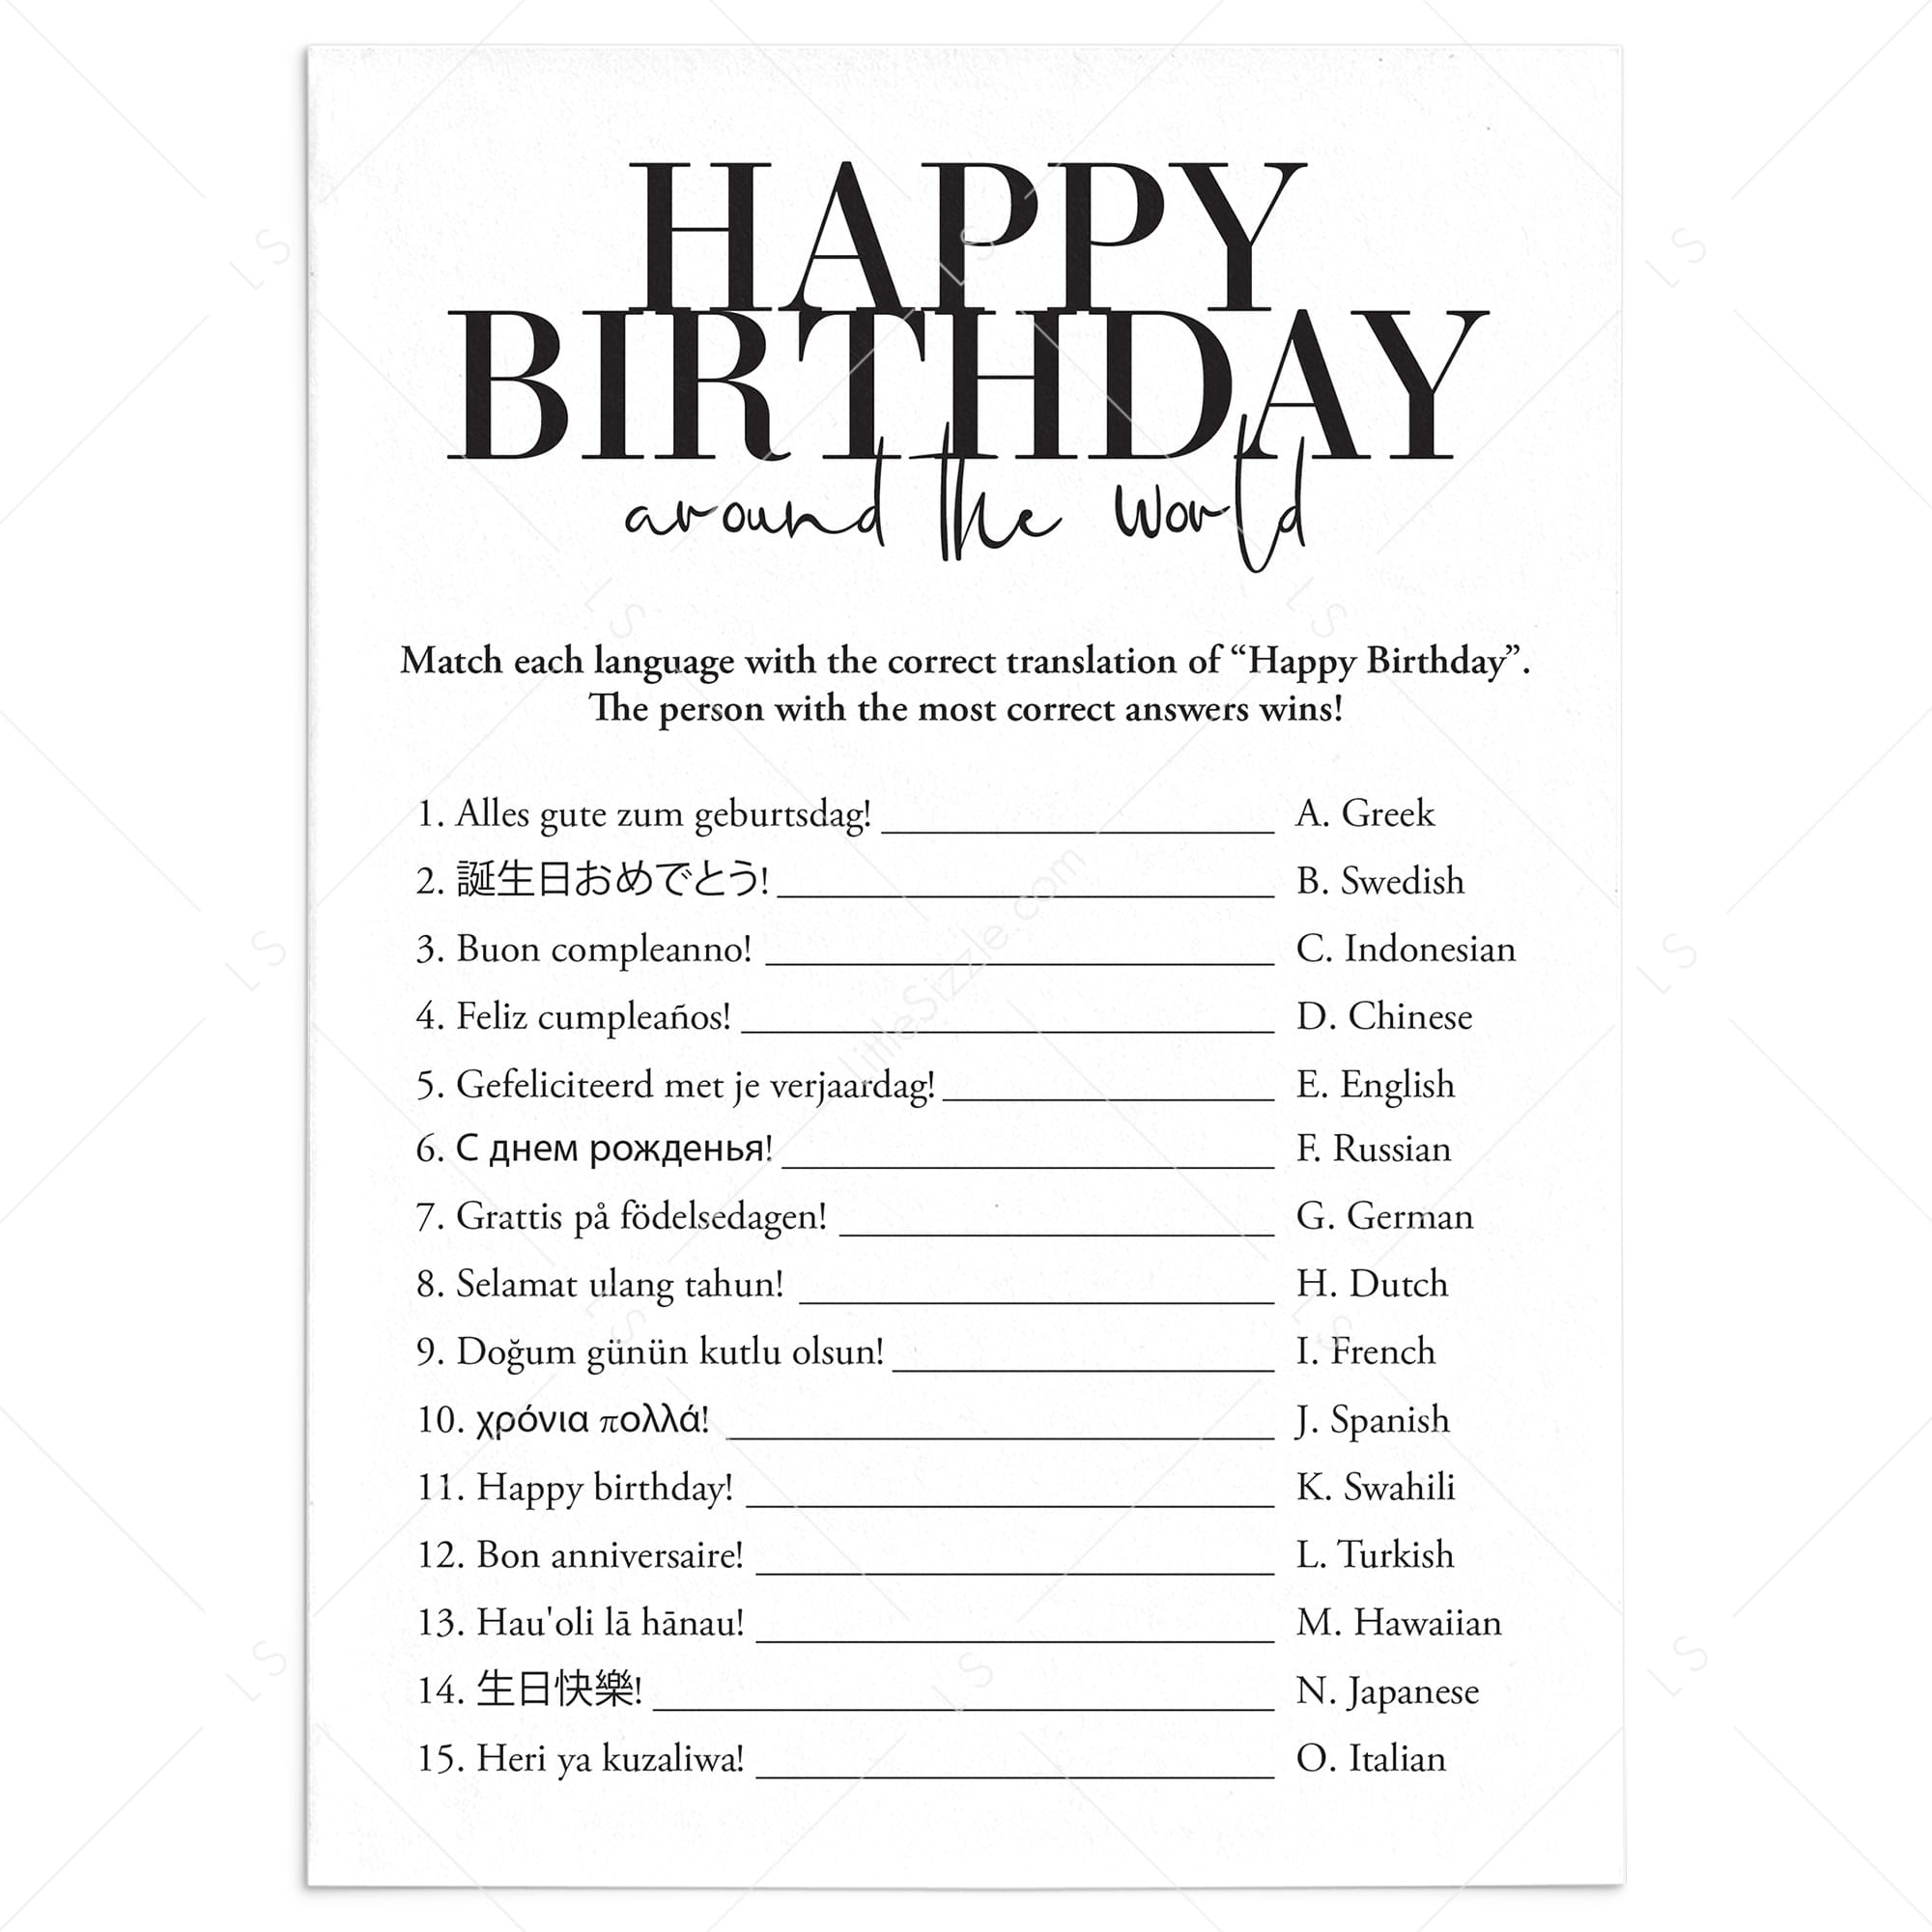 Happy Birthday Around The World with Answers Printable by LittleSizzle